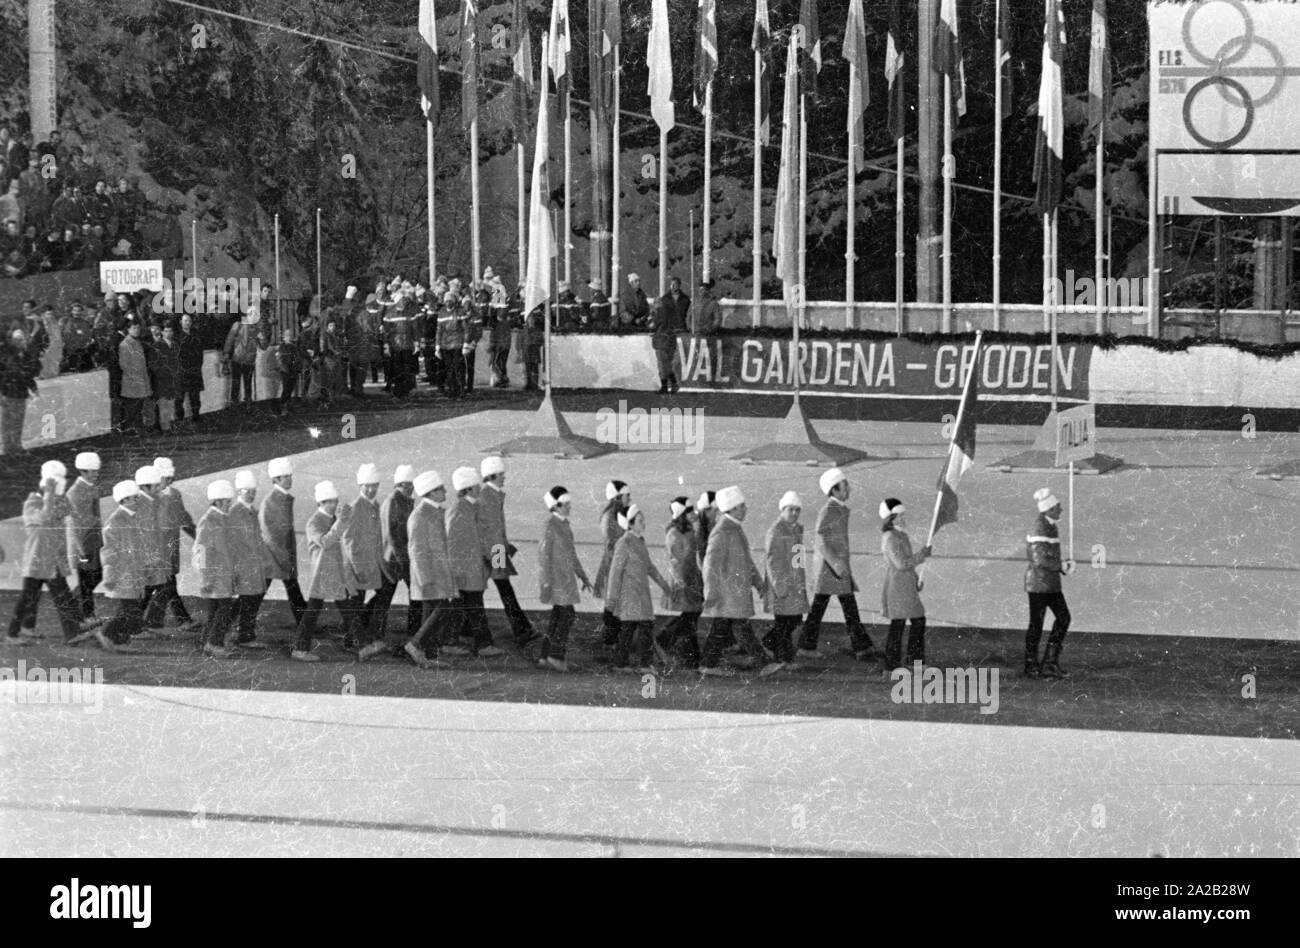 The Alpine World Ski Championships took place in Val Gardena between 7.2.1970 and 15.2.1970, and it had been the only World Cup so far, the results of which were included in the Alpine Ski World Cup.  Photo of the Italian team moving into an ice stadium, presumably the uncovered St. Ulrich stadium at that time. Stock Photo